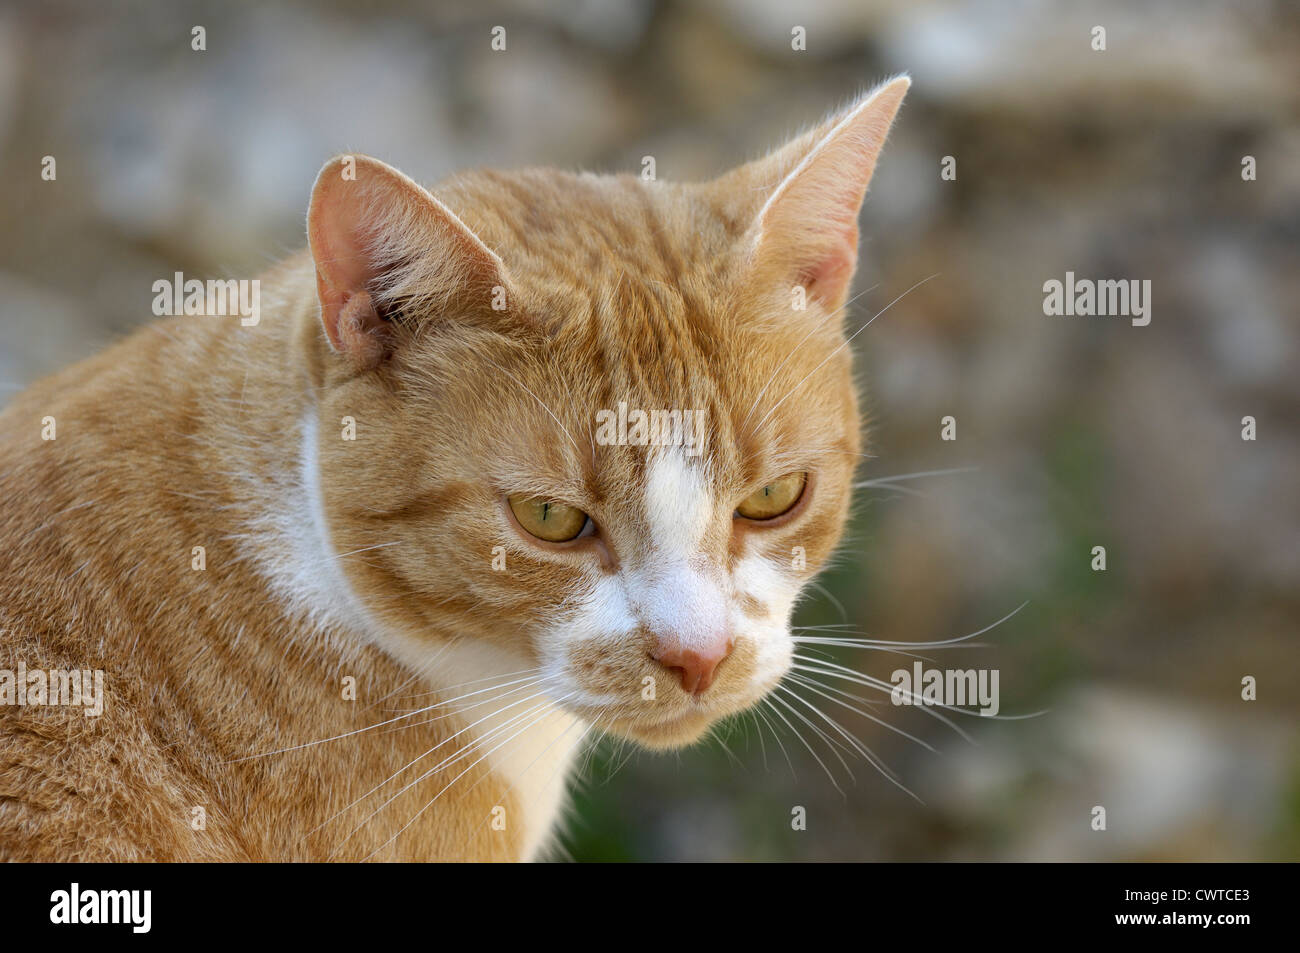 A ginger cat watching with ears alert Stock Photo